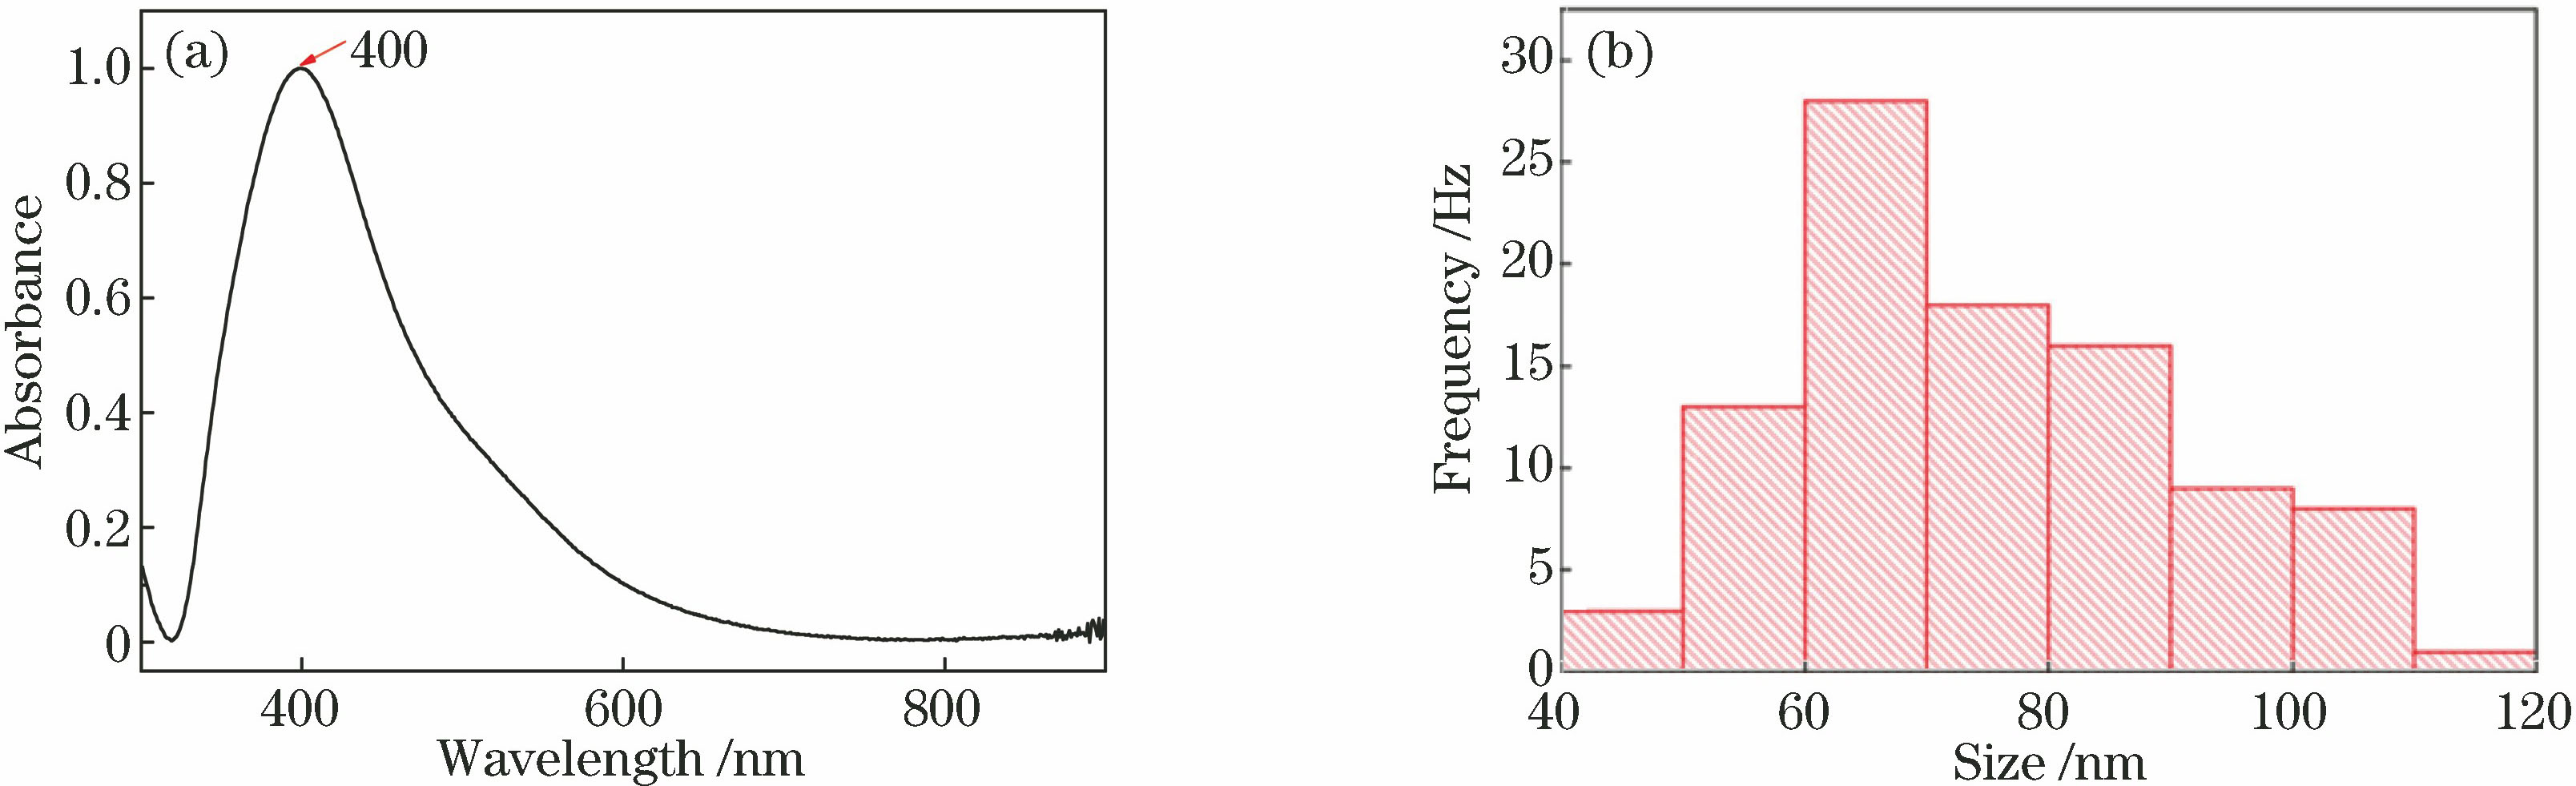 UV-VIS absorption spectrum and size distribution of silver nanoparticles. (a) UV-VIS spectrum of silver nanoparticles; (b) size distribution of silver nanoparticles